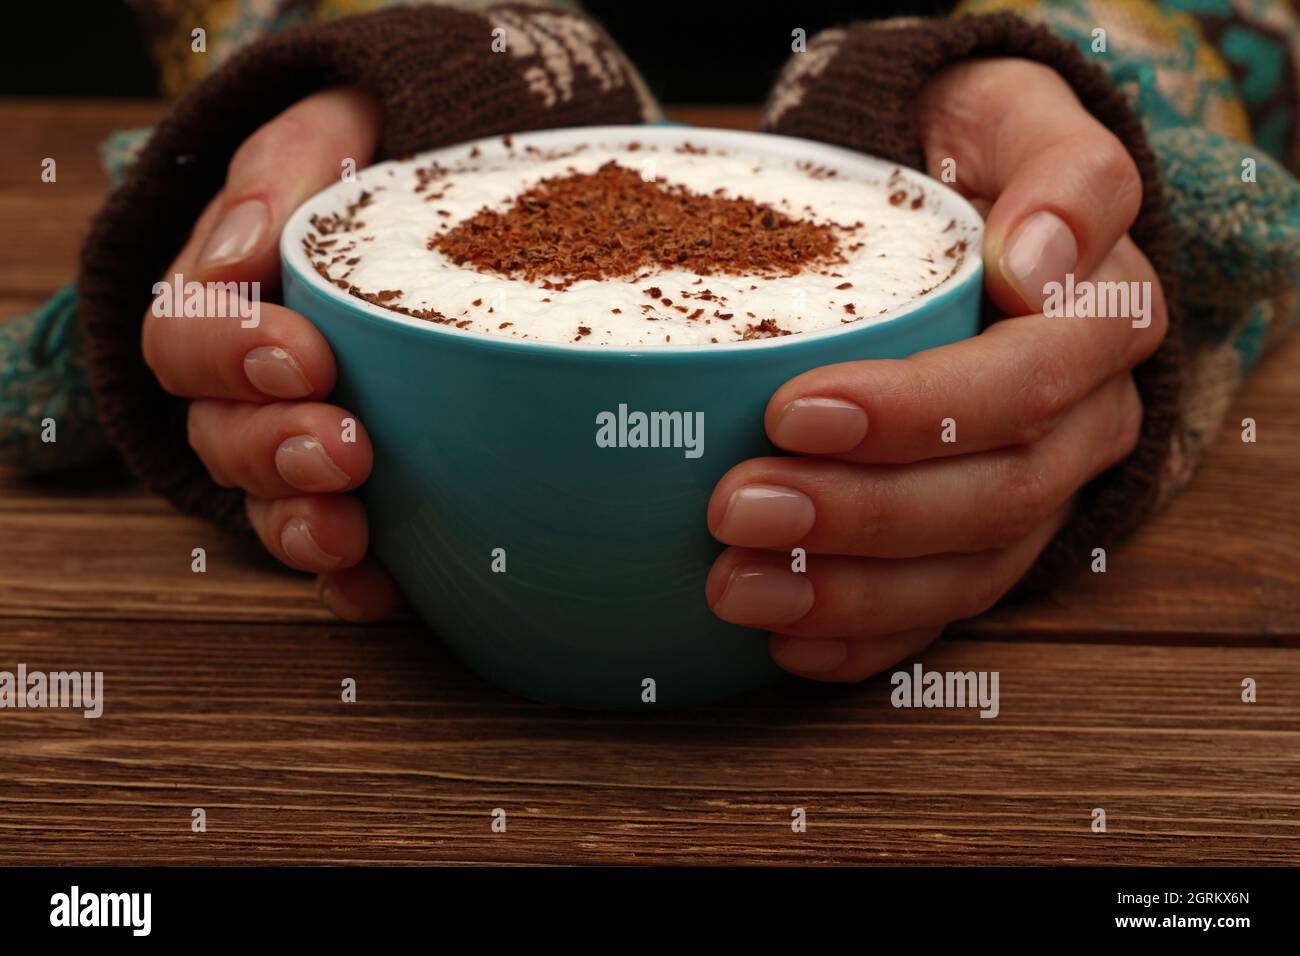 Cropped Hands Of Woman Holding Coffee Cup On Table Stock Photo